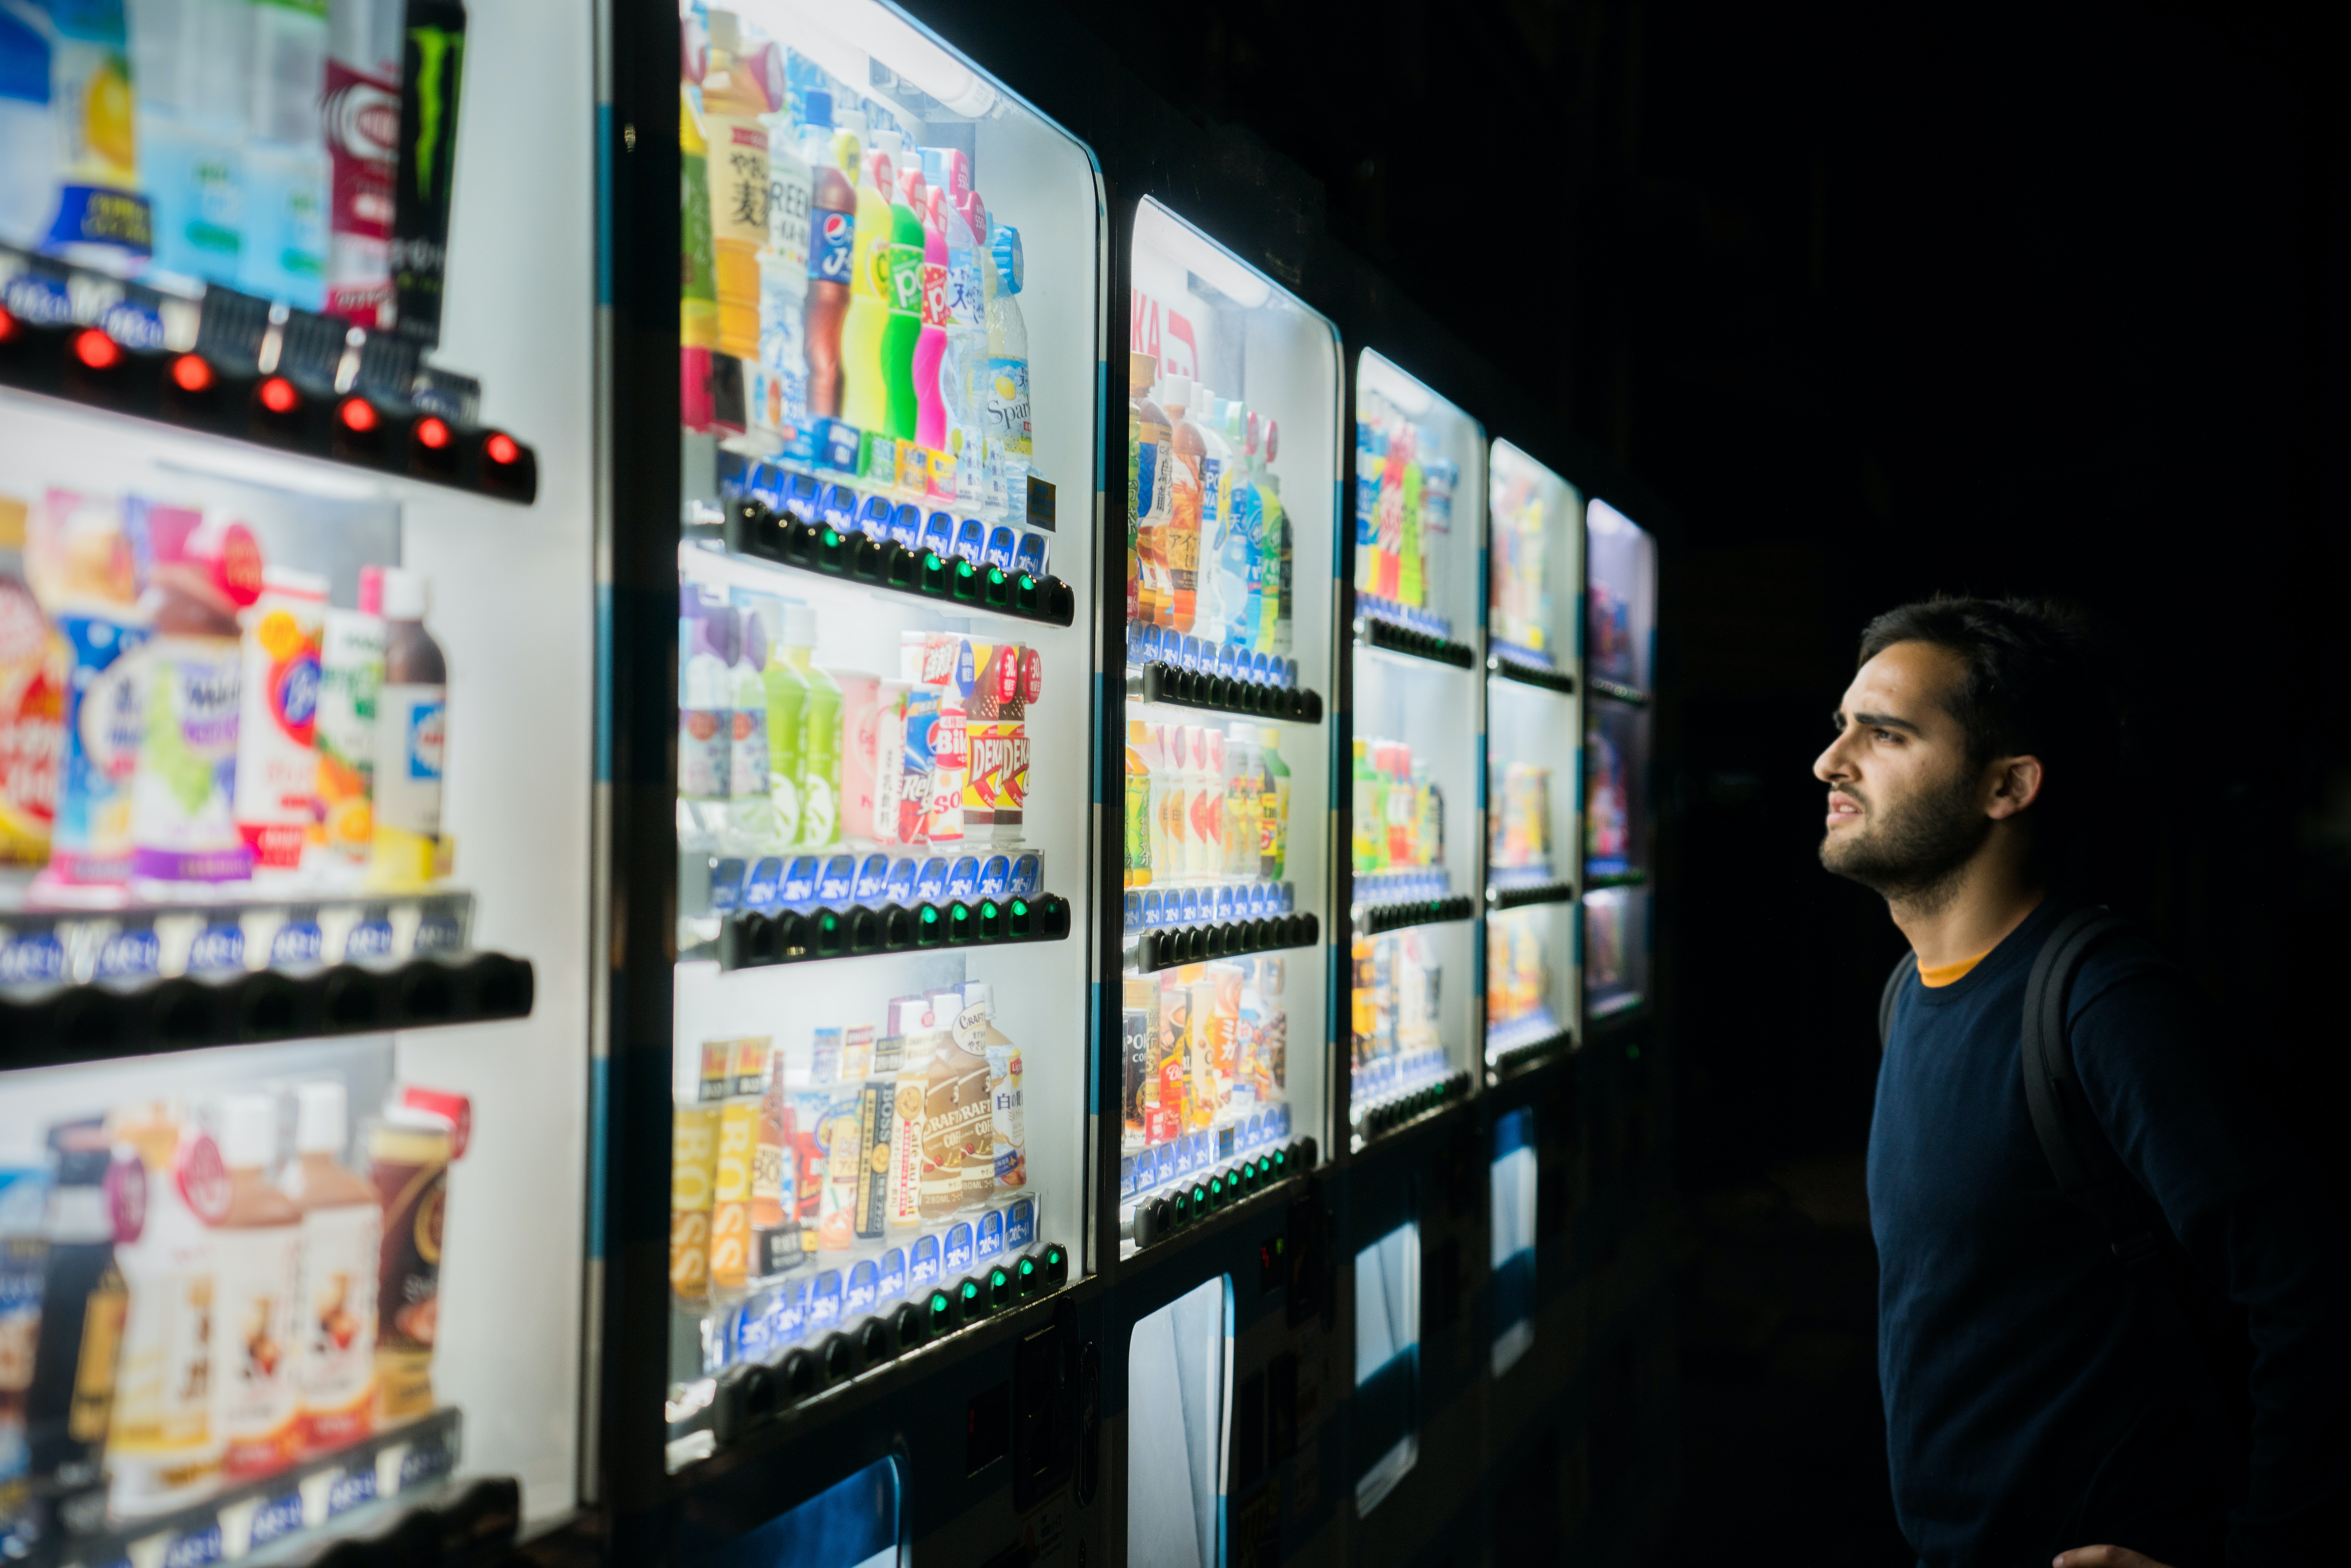 A person feeling overwhelmed by their options in front of many vending machines